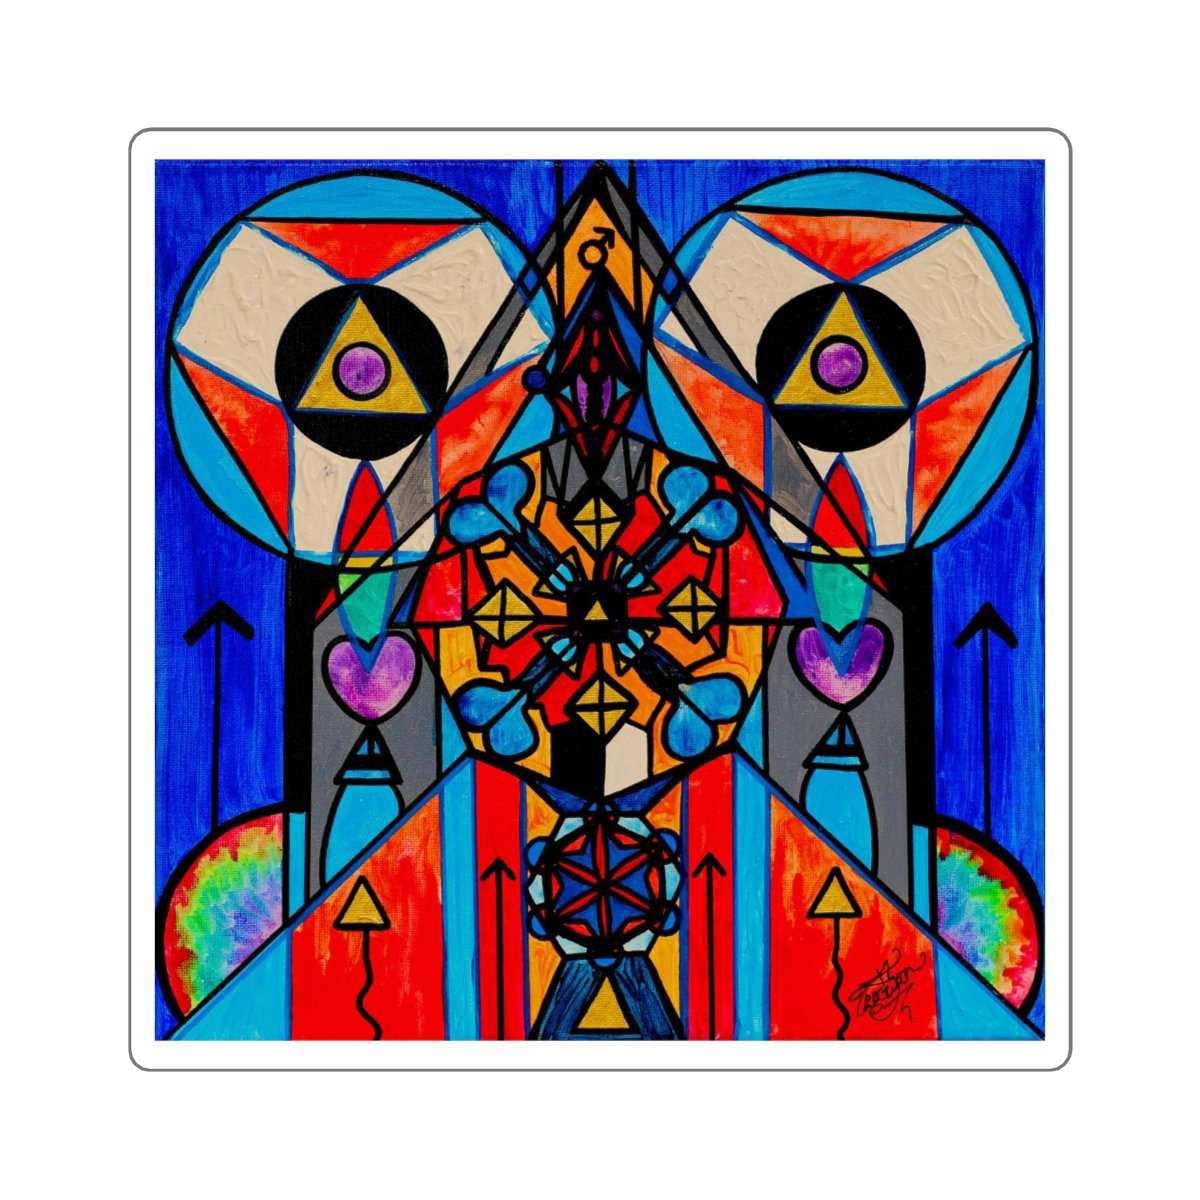 buy-cheap-wholesale-divine-masculine-activation-square-stickers-hot-on-sale_2.jpg